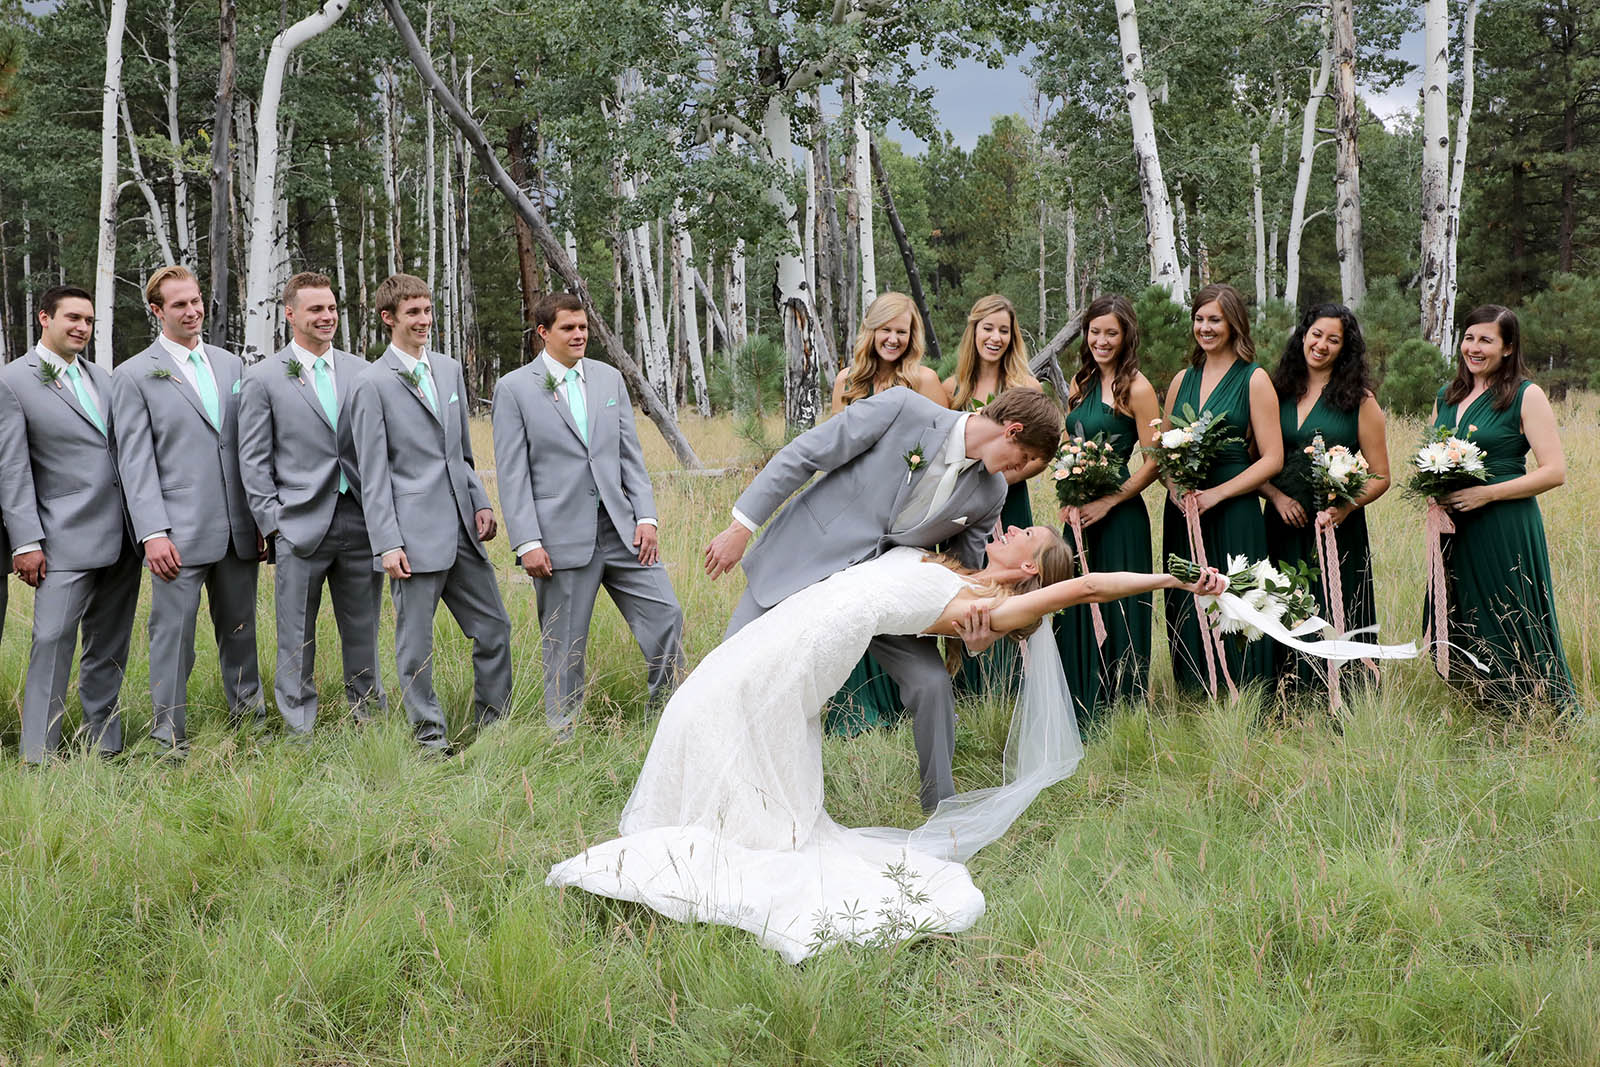 Outdoor wedding pictures at the Flagstaff Nordic Center